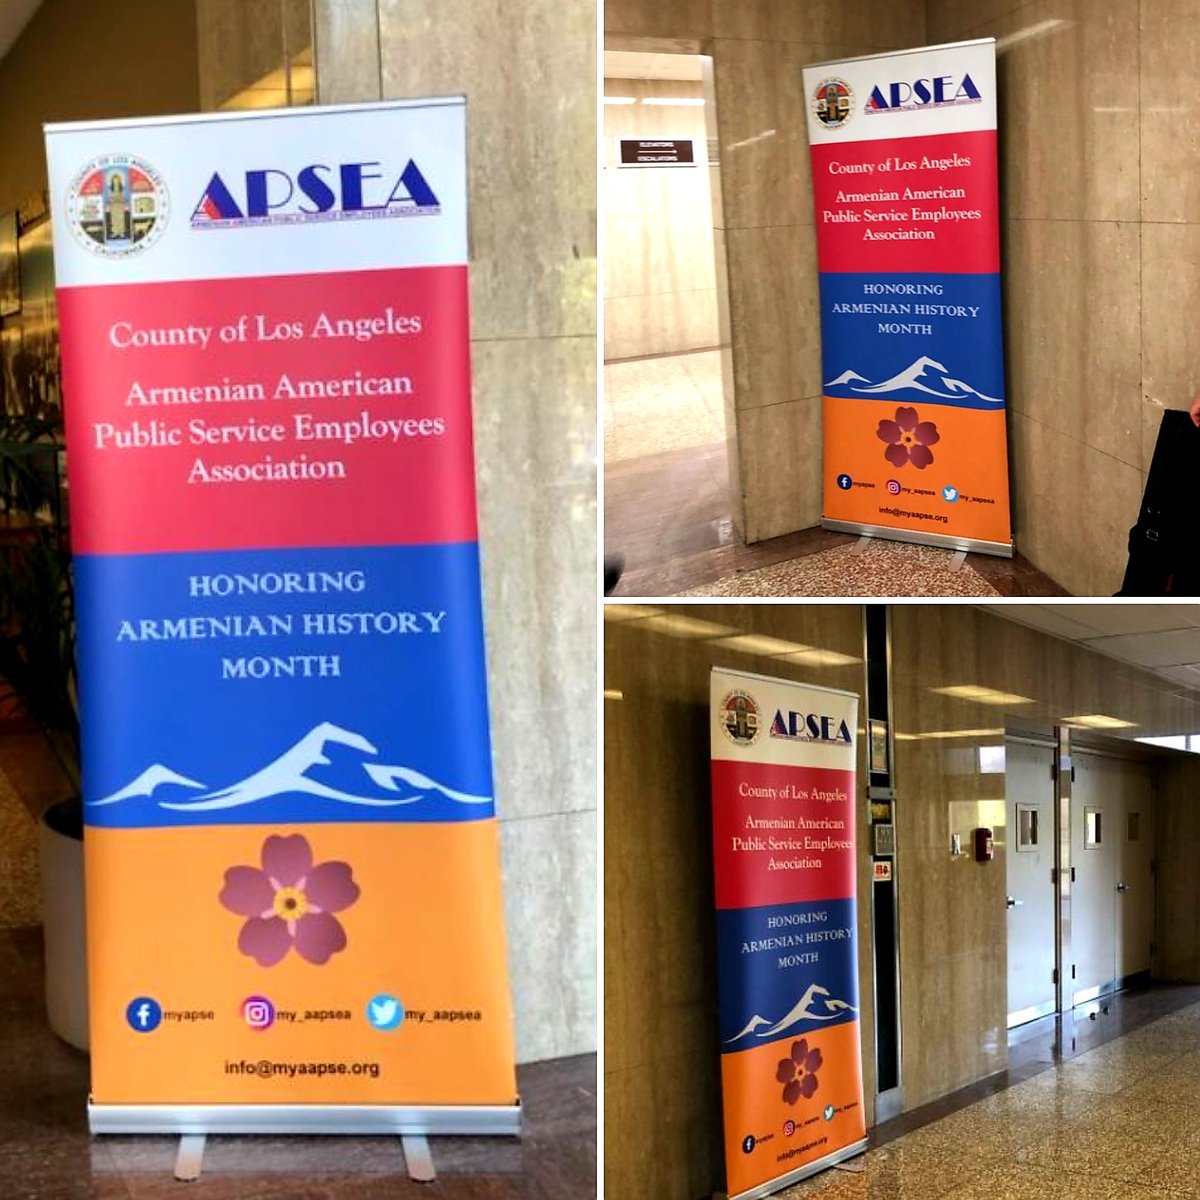 AAPSEA Armenian History Month banners are going up all across Los Angeles County facilities! Want one at your location for the month of April? Please contact us directly to make it happen! #aapsea #aapsea2019 #myaapsea #armenianhistorymonth #armeniangenocide #neverforget